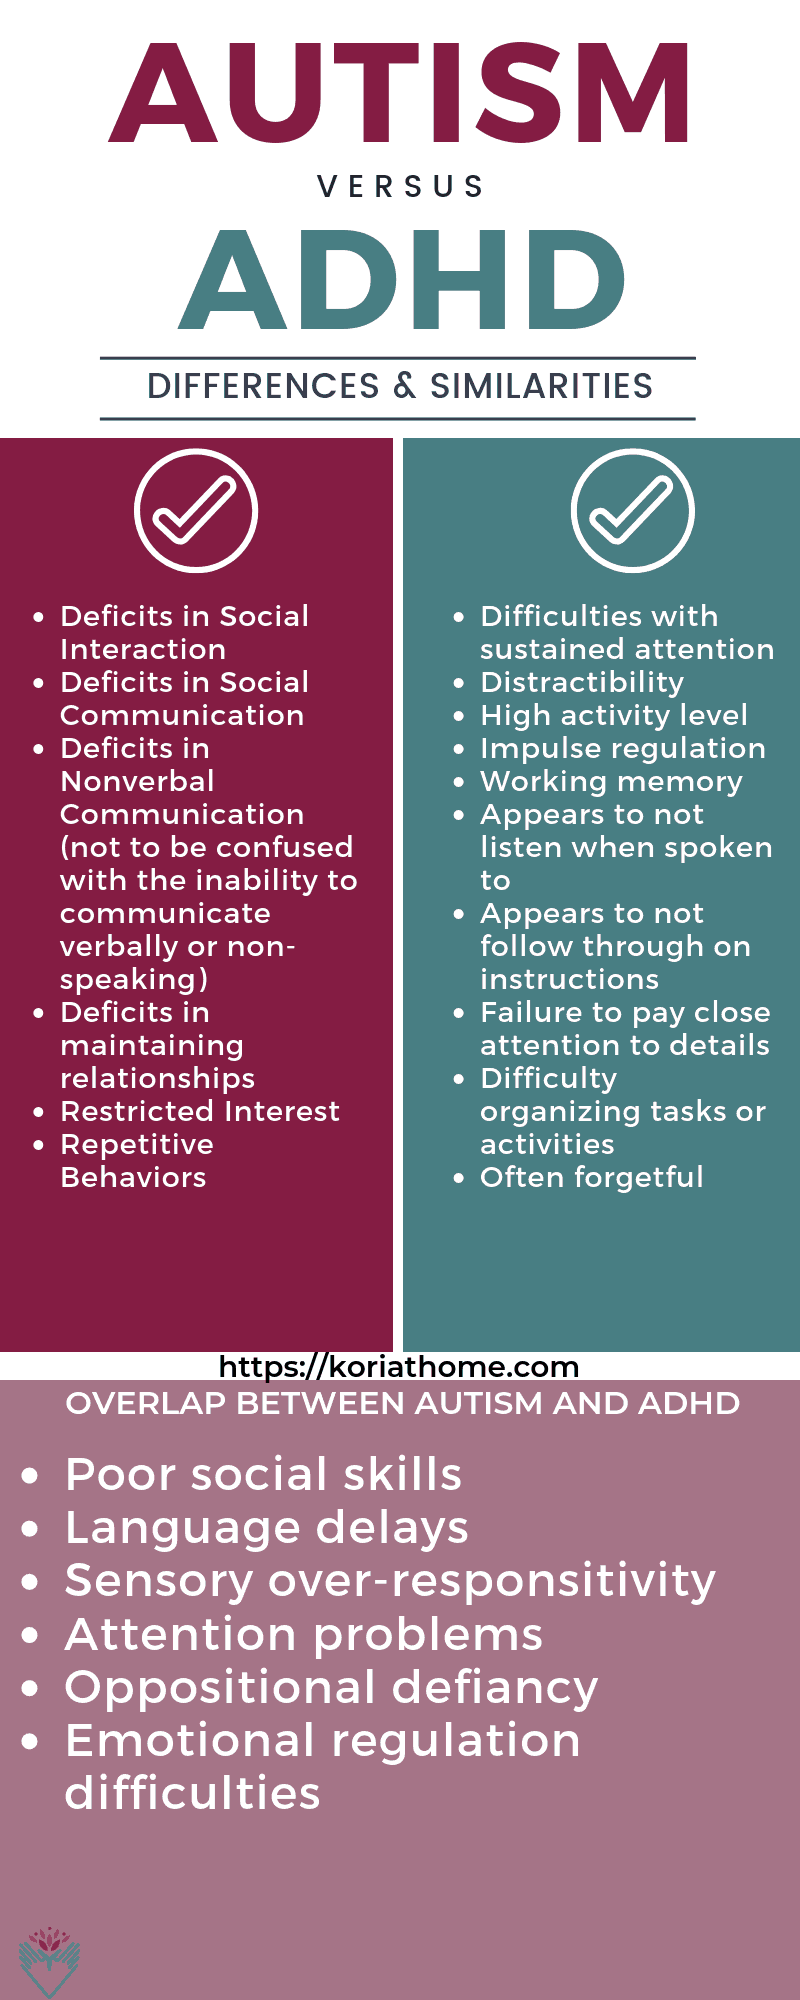 Traits of autism versus traits of adhd infographic